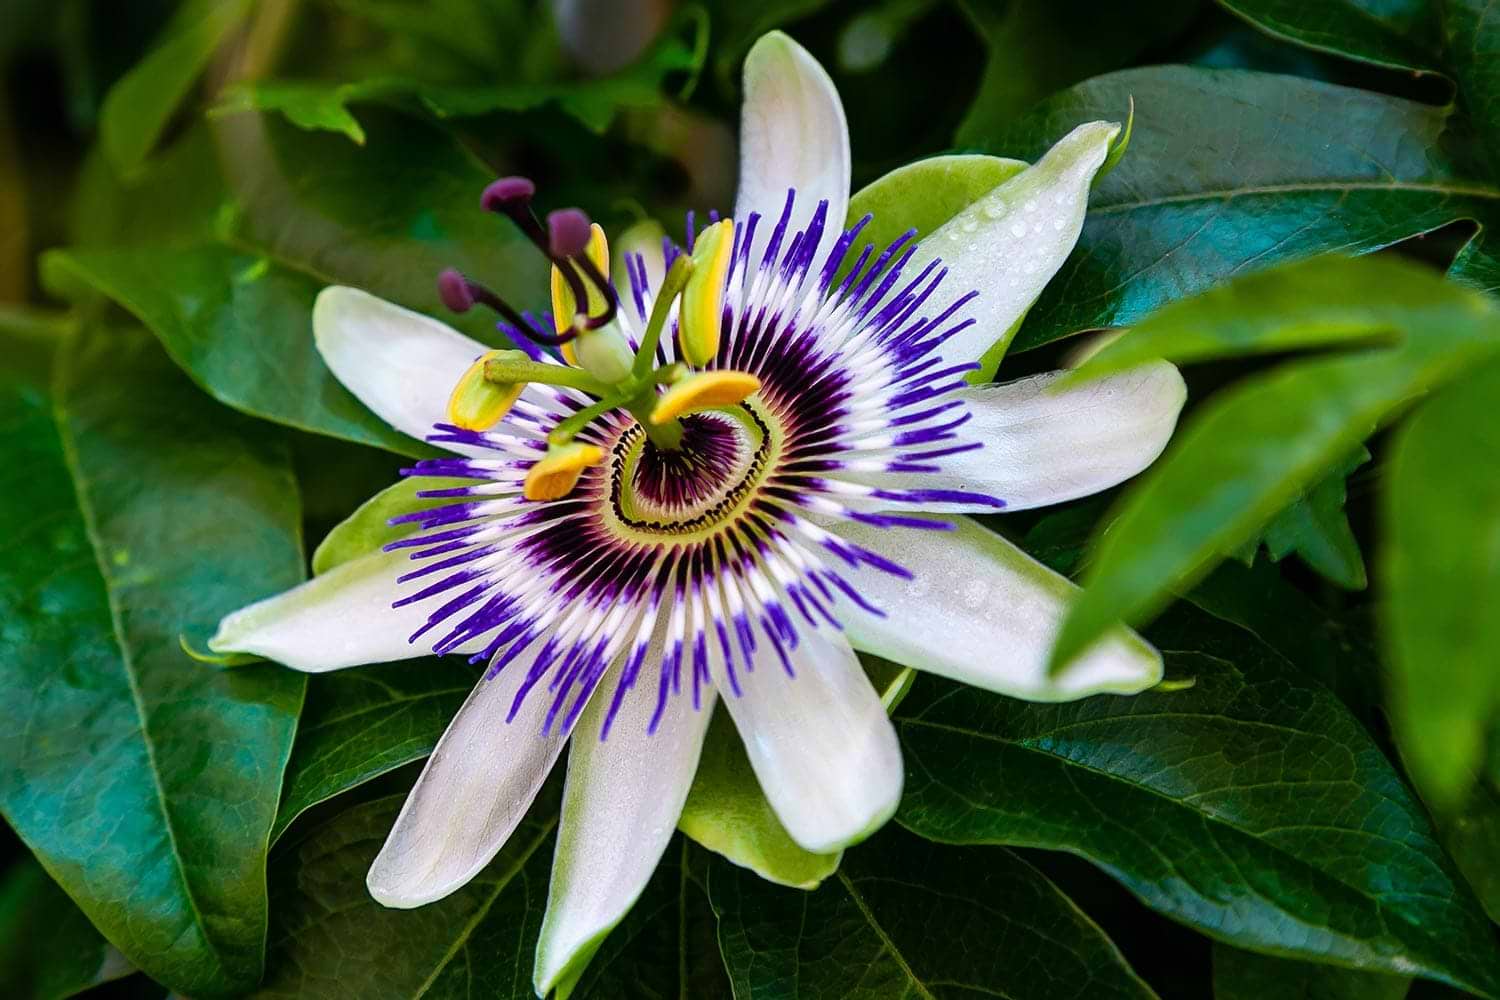 Passionflower nervine tonic for stress